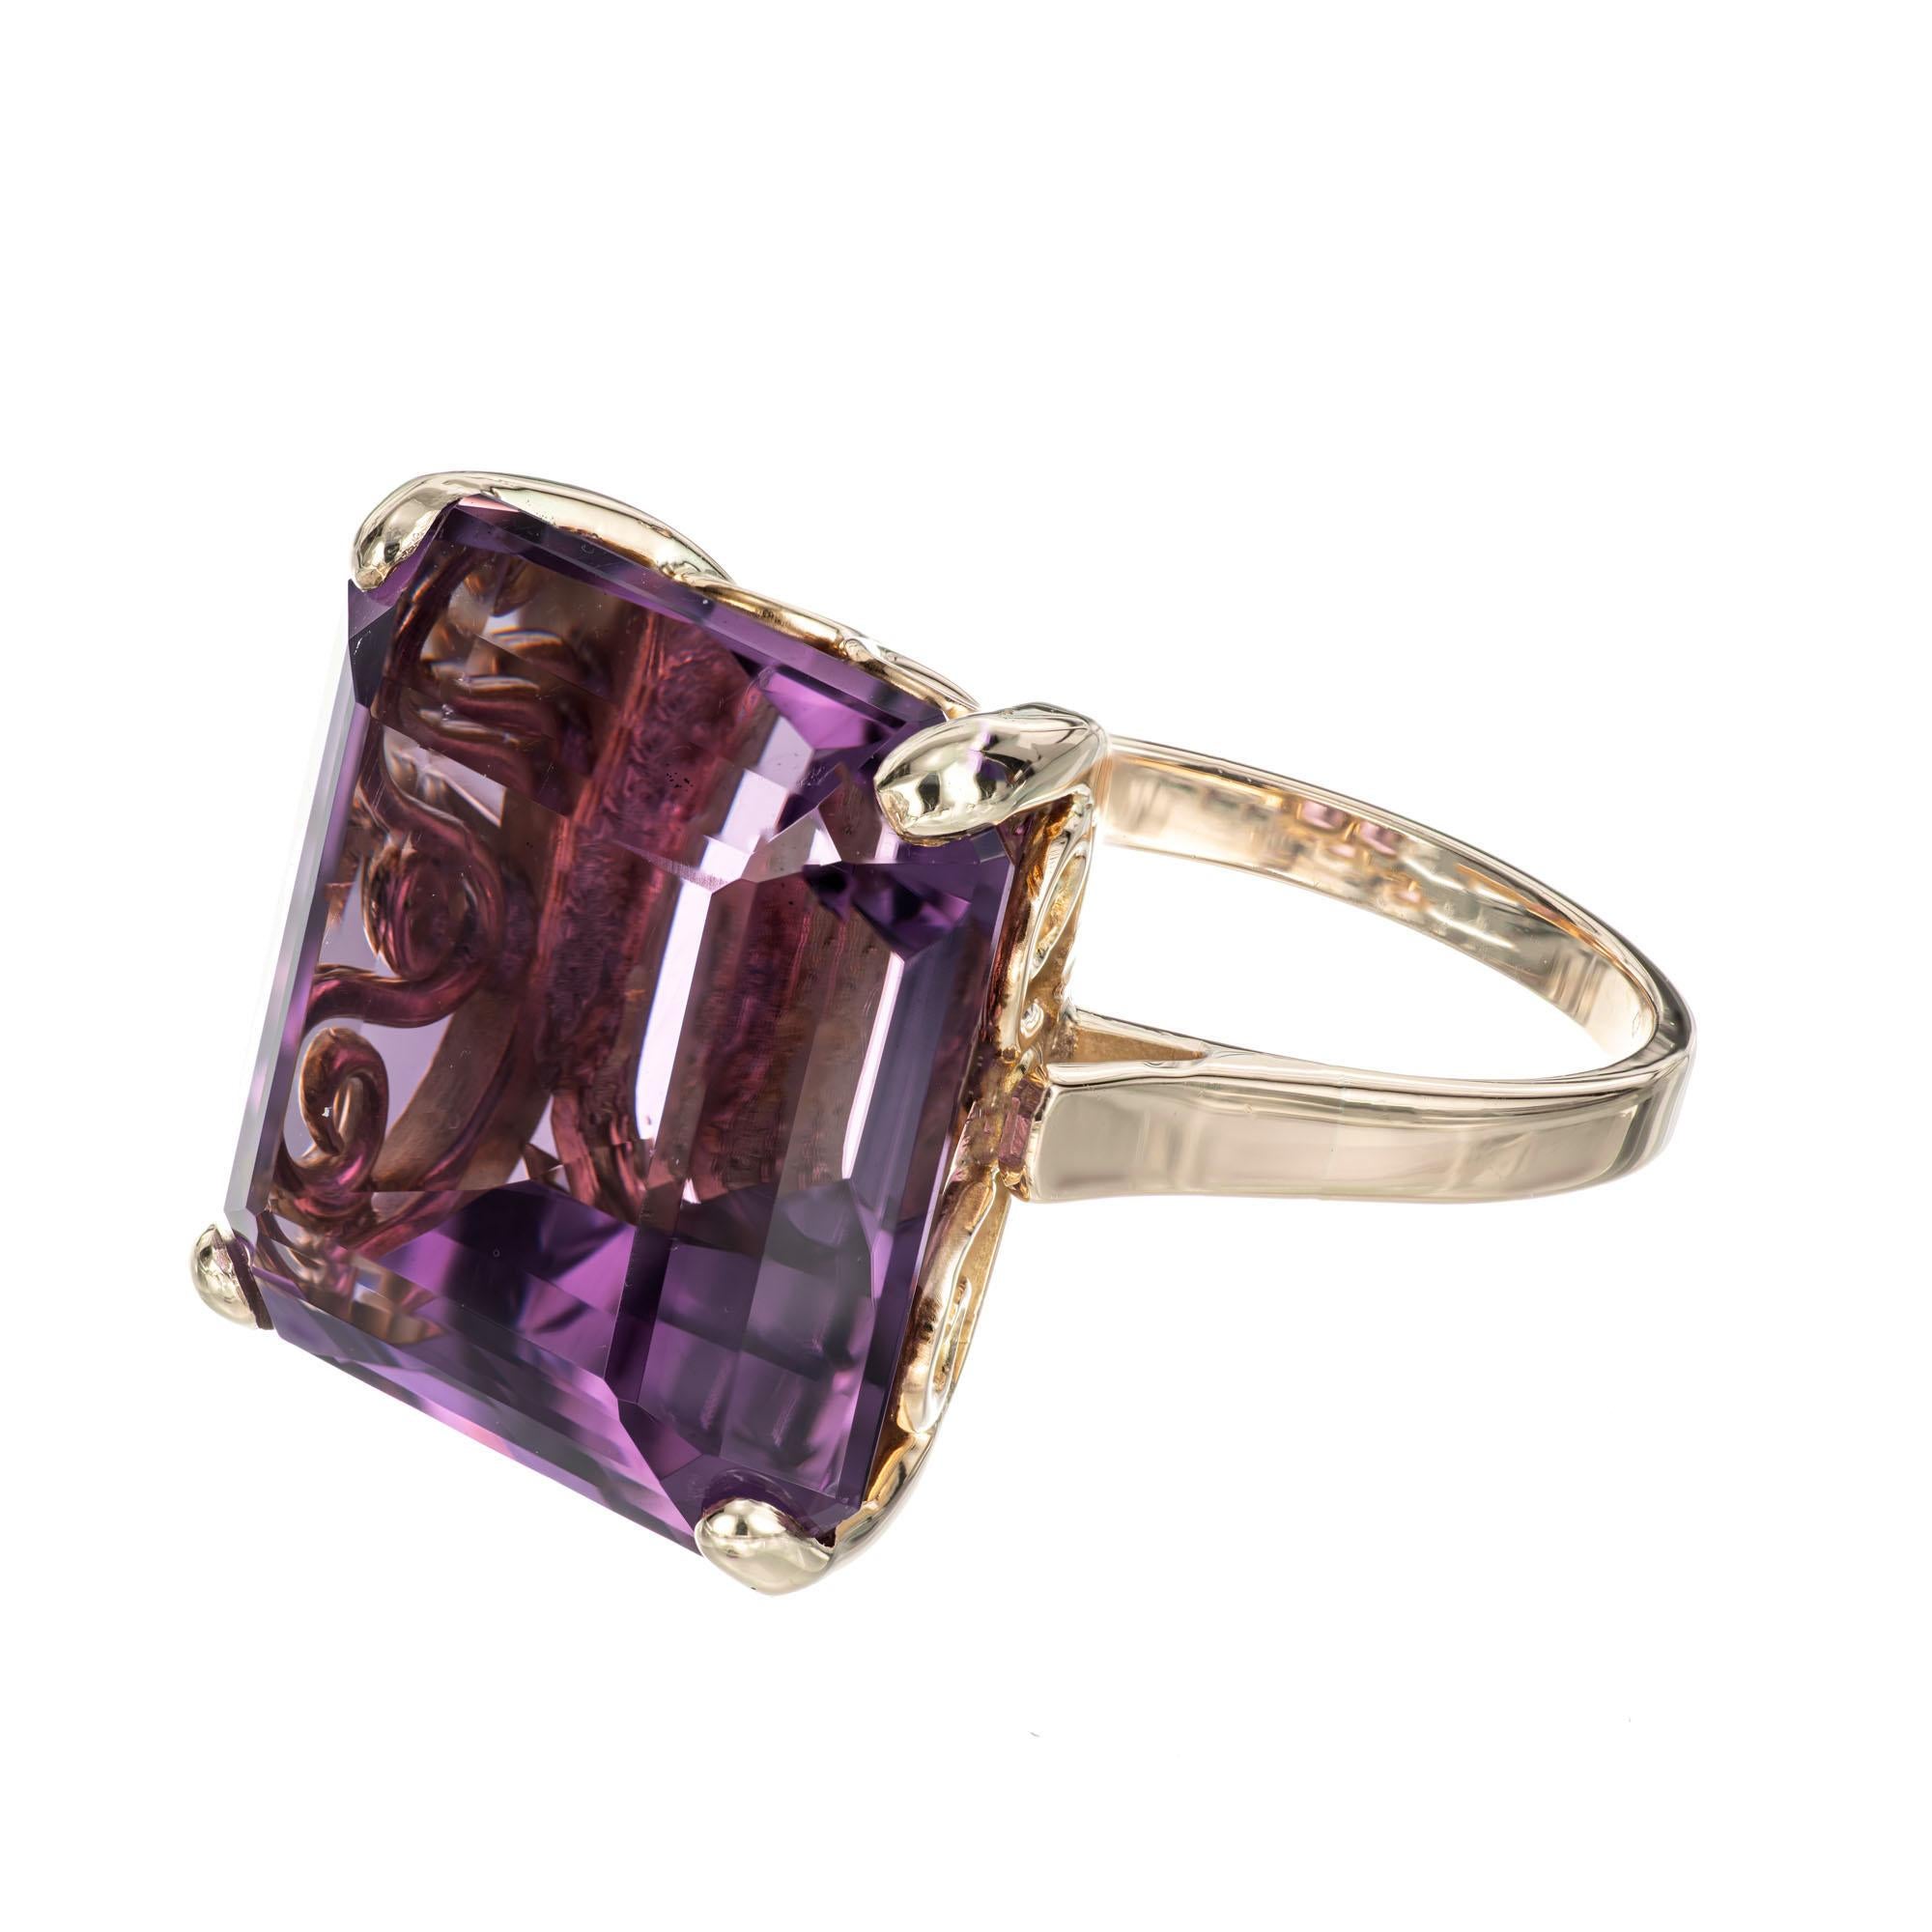 1940's square amethyst cocktail ring. 17.00cts amethyst set in a handmade 18k yellow gold setting. 

1 Well-polished 16.5 x 16mm square bright purple Amethyst, approx. total weight 17.00cts
Size 7 and sizable
18k yellow Gold
9.1 grams
Stamped: